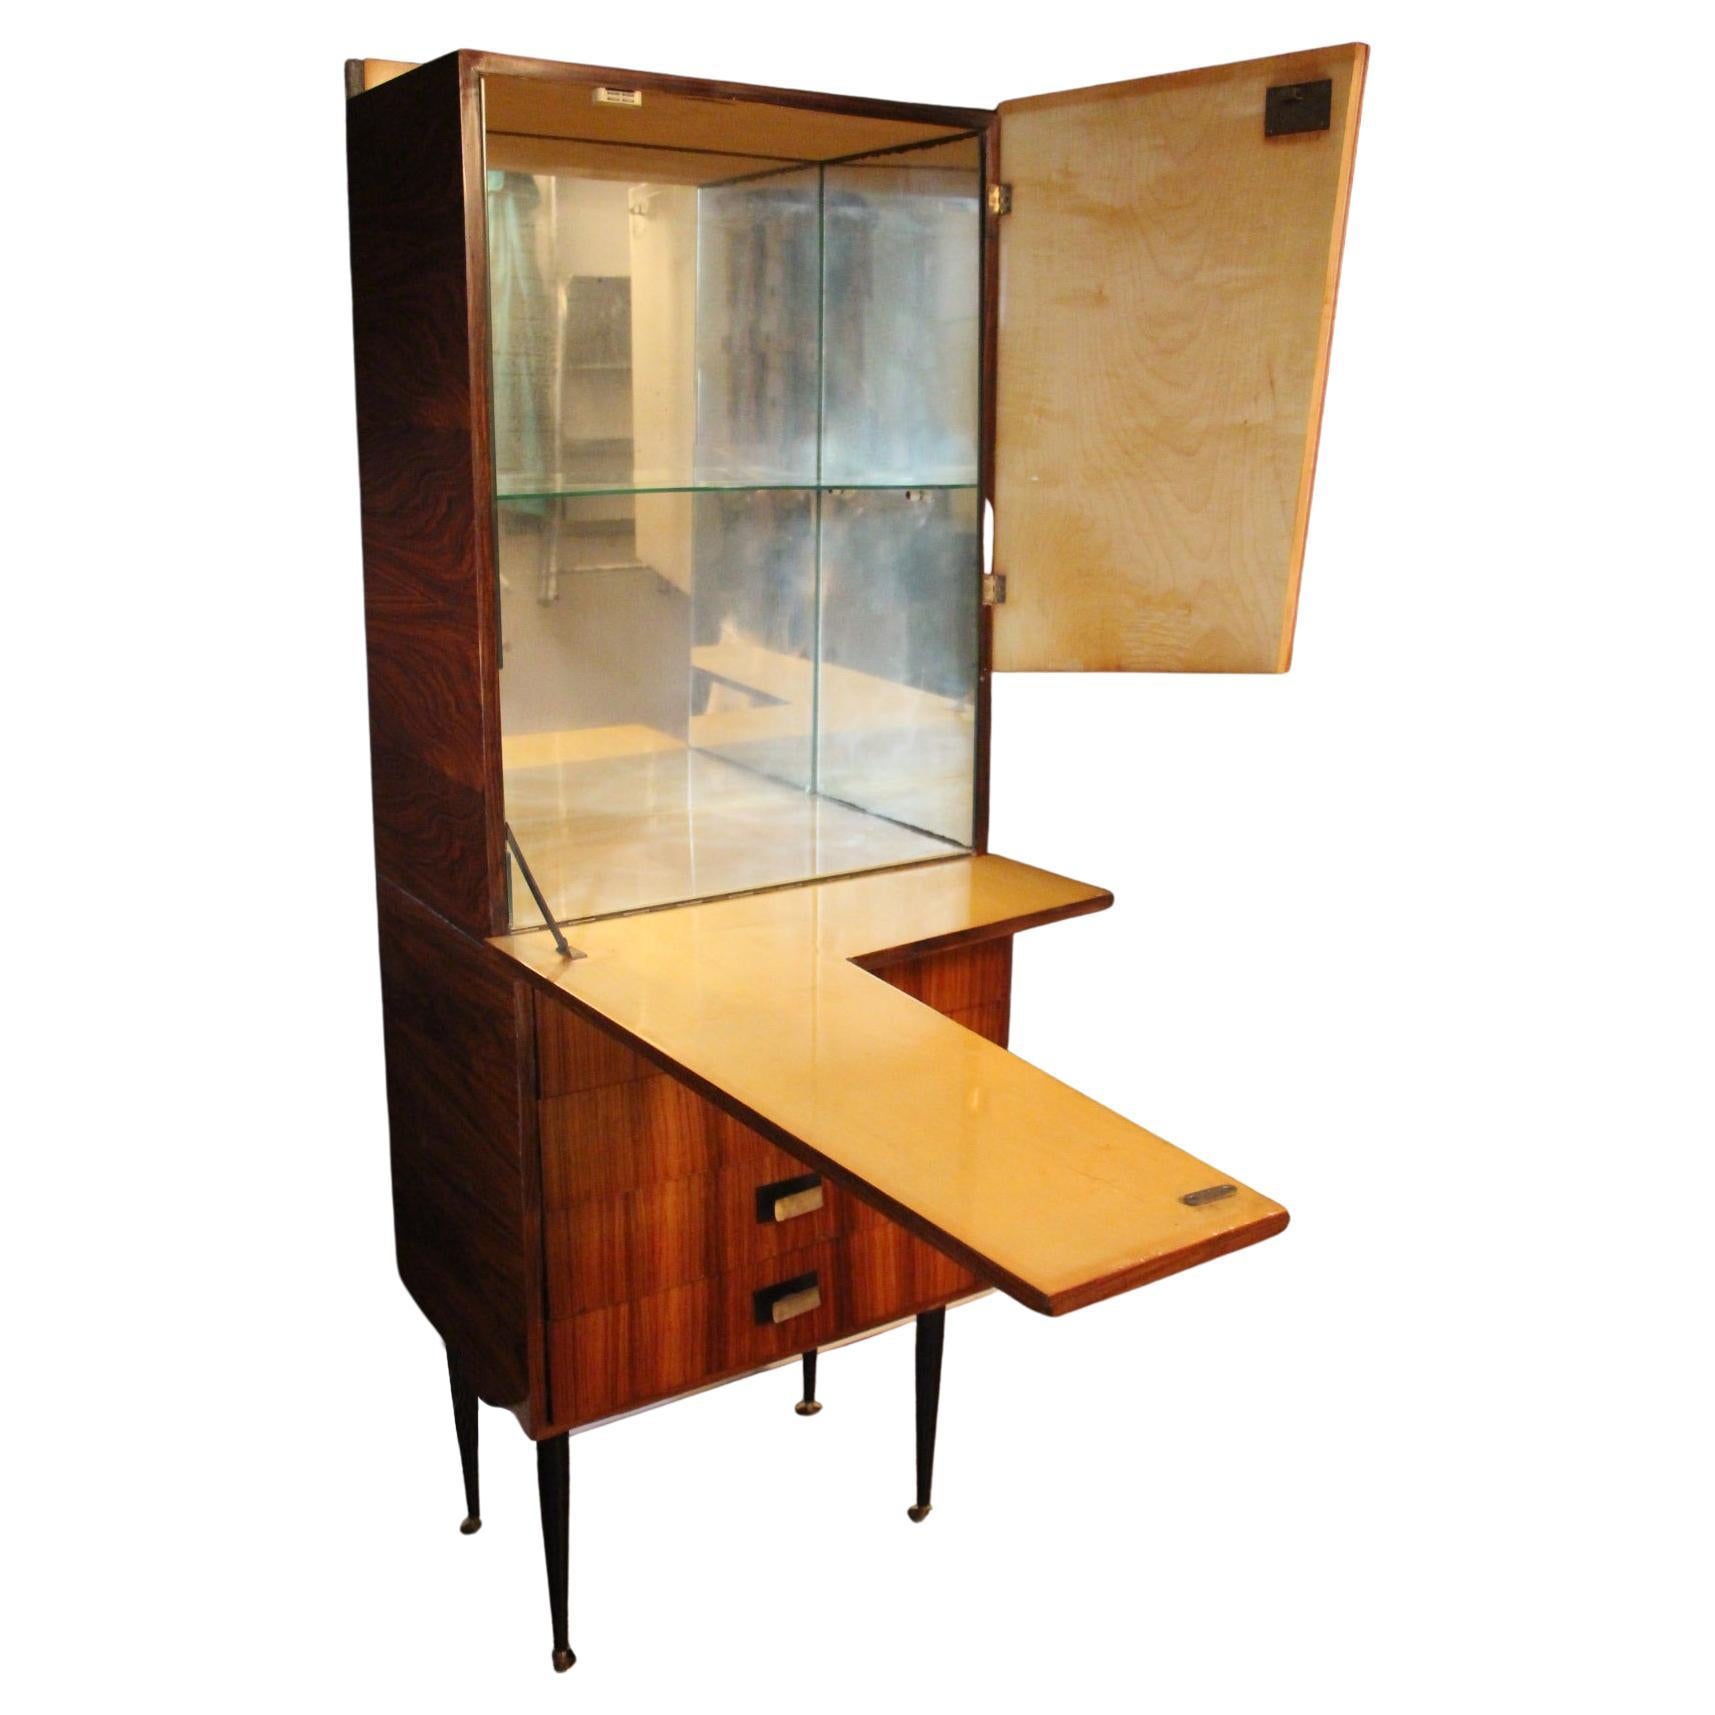 Midcentury Dry Bar Cabinet, Cocktail Bar Cabinet, Dassi's or Paolo Buffa's Style